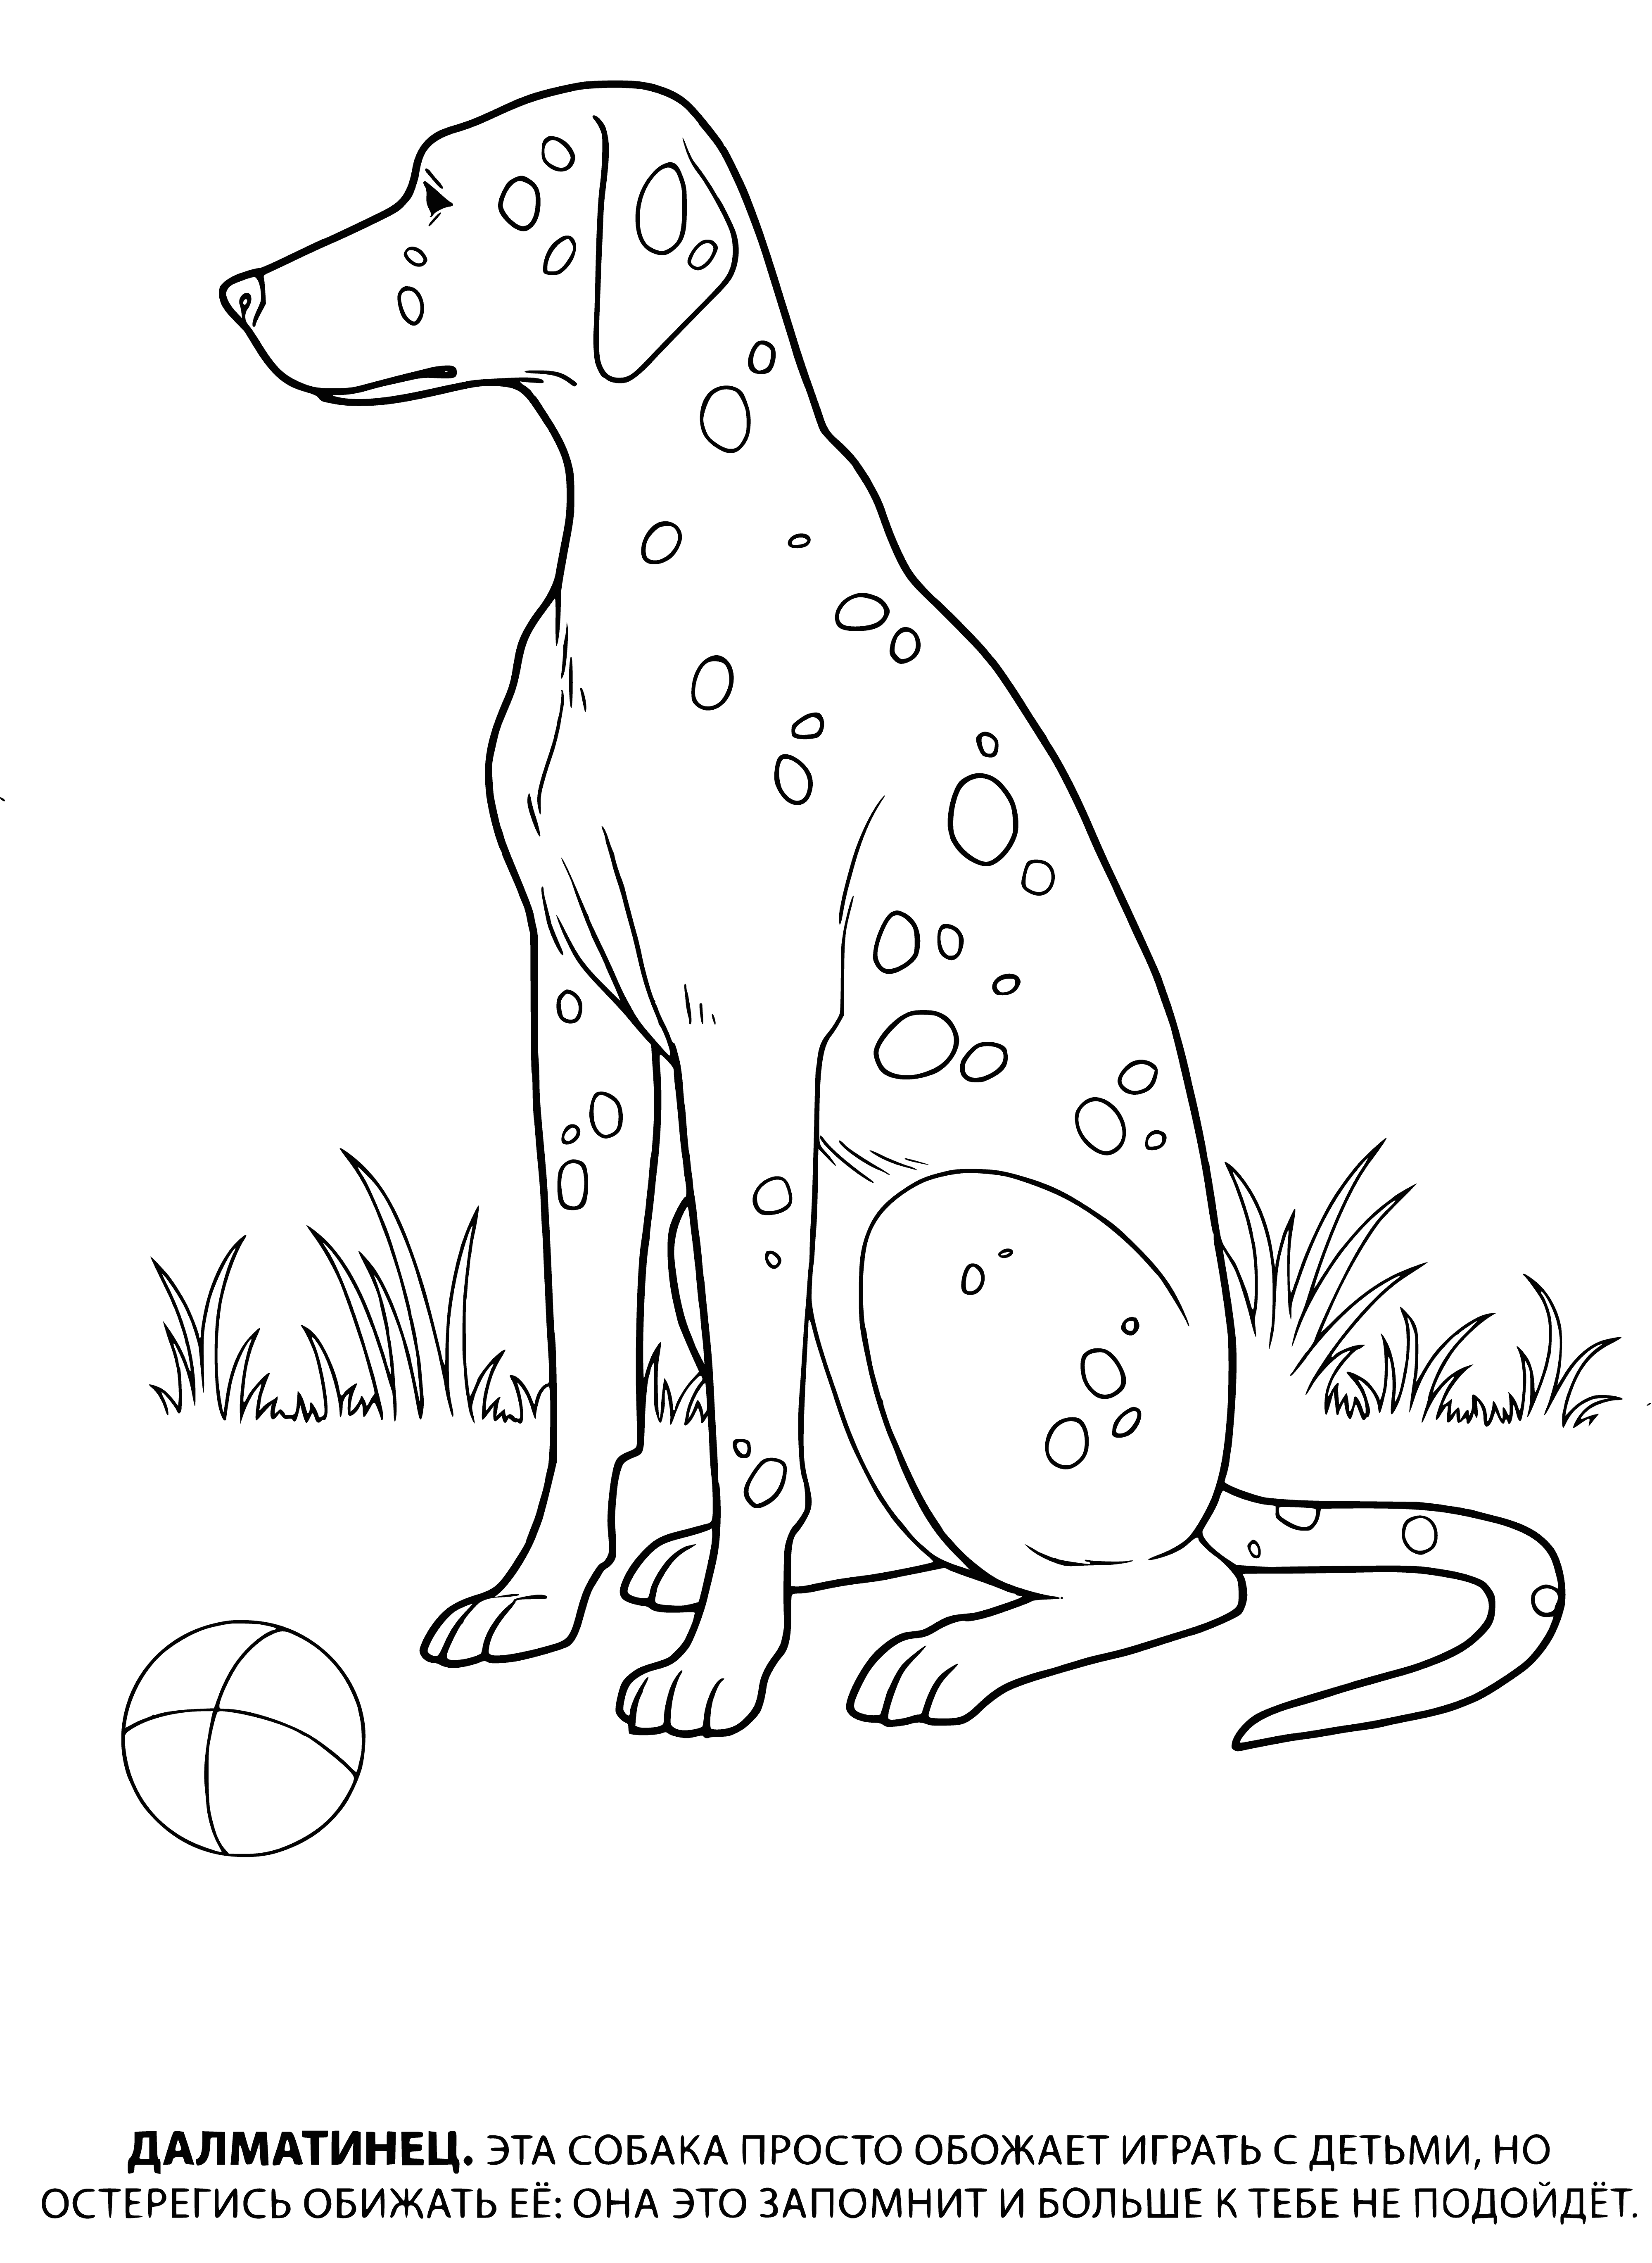 coloring page: Dalmatians are active, loyal guard dogs who are great with kids. They have a short, stiff coat, usually black & white or liver & white.